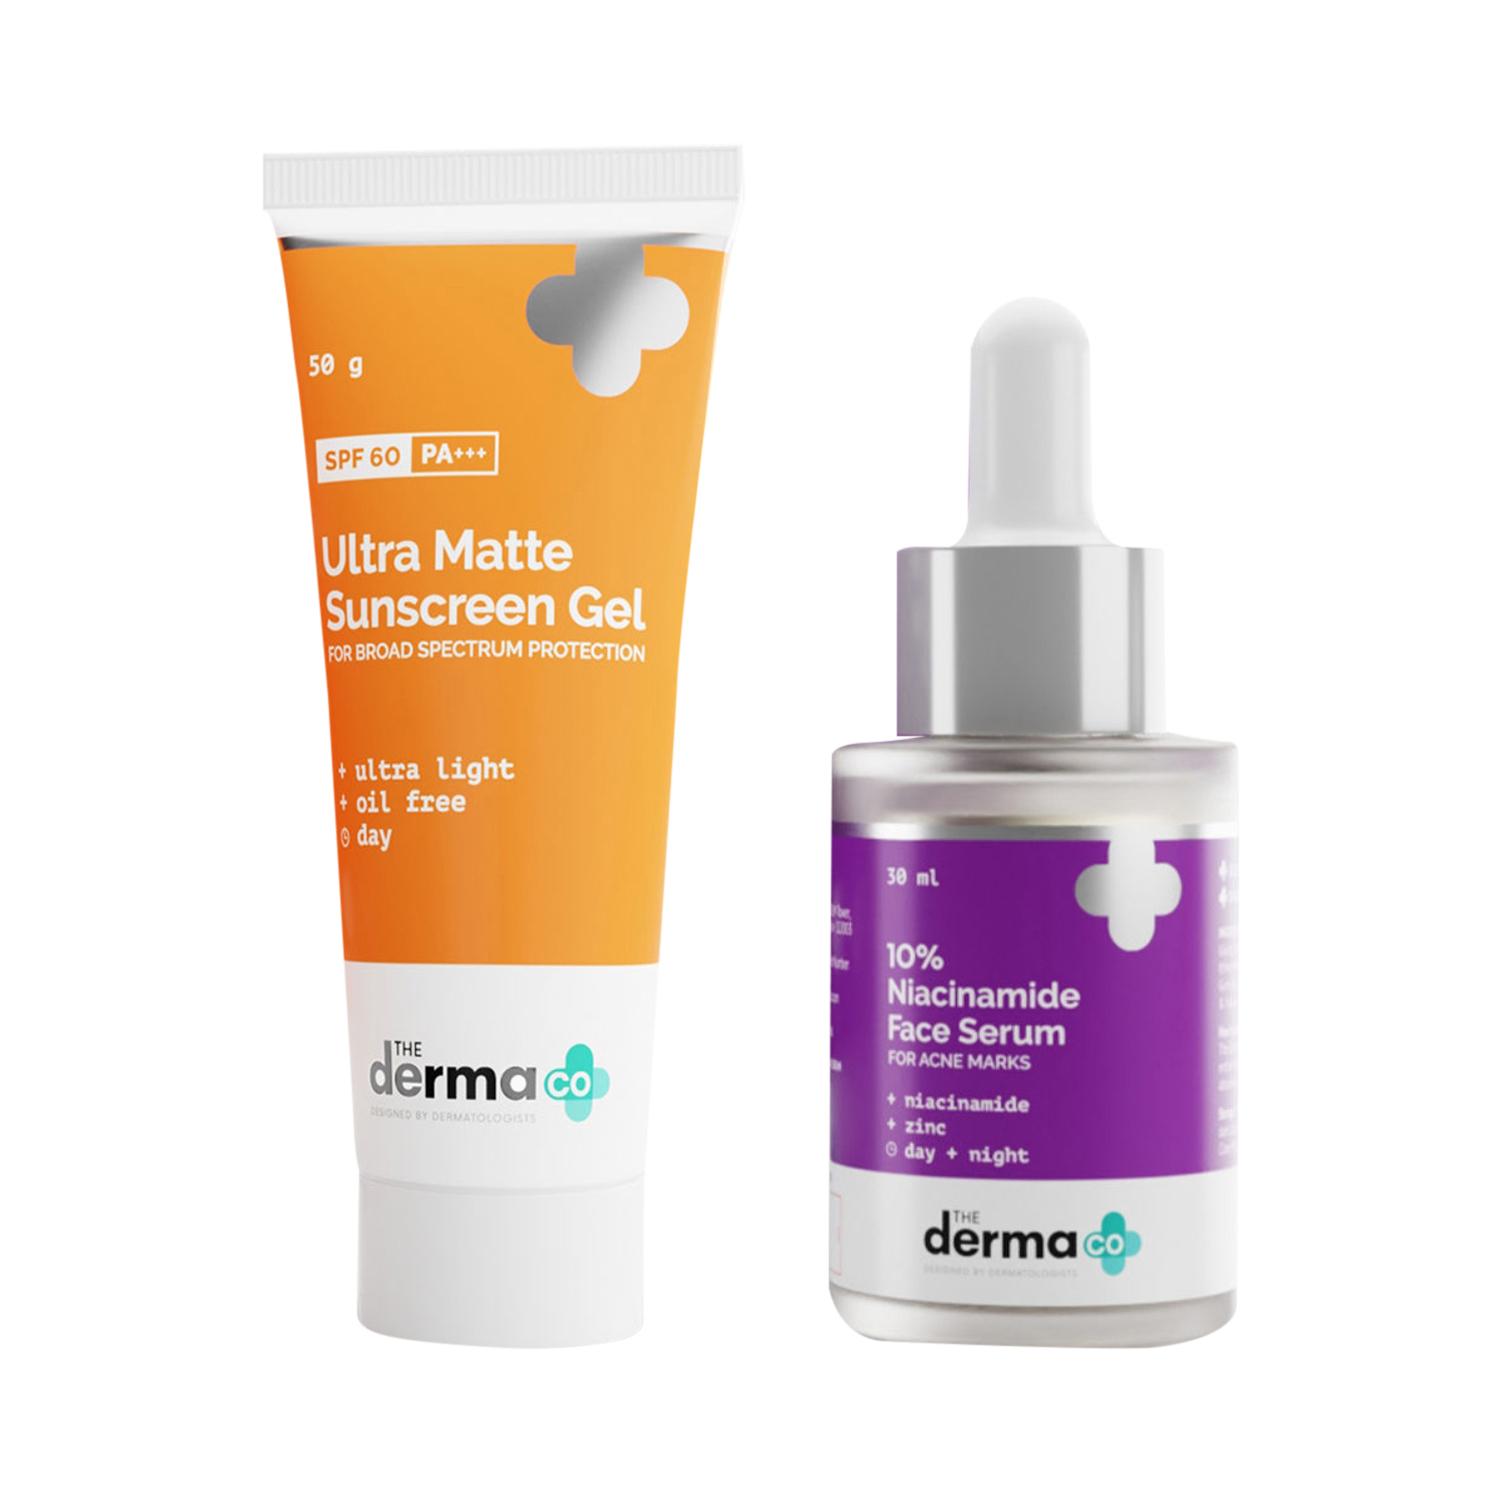 The Derma Co | The Derma Co. No More Acne Marks Summer Combo